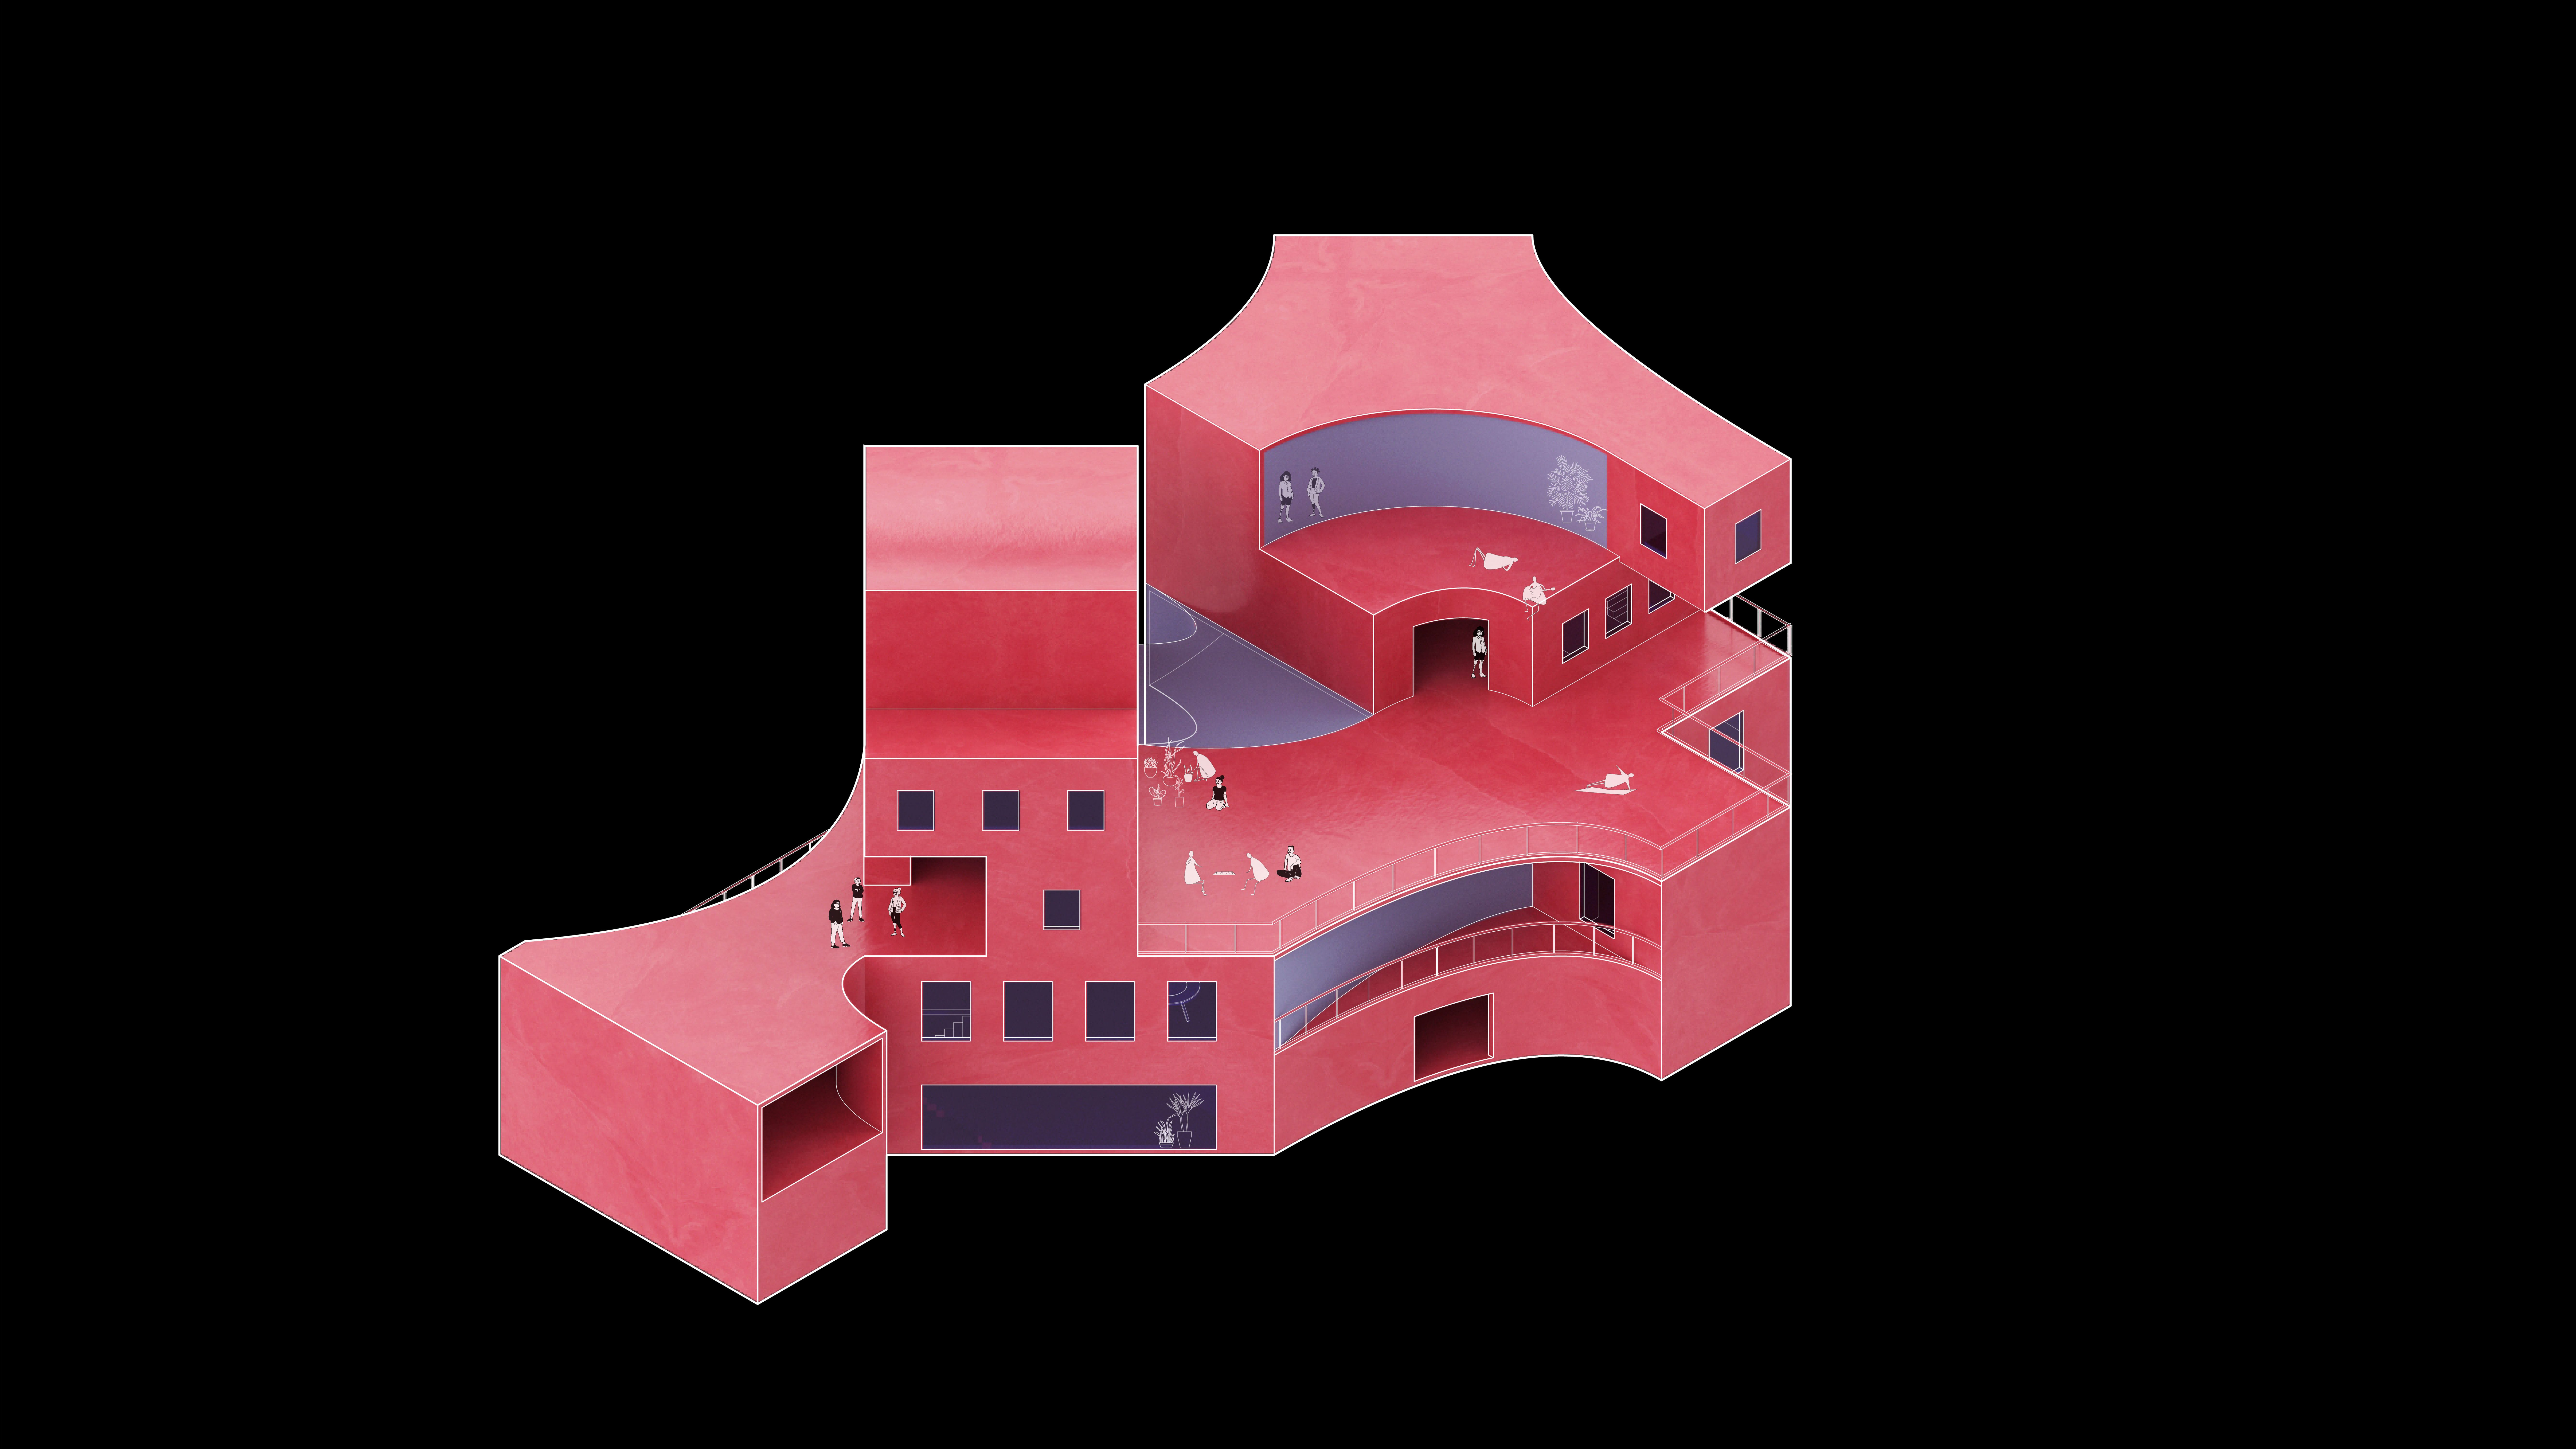 Back isometric render of architecture building